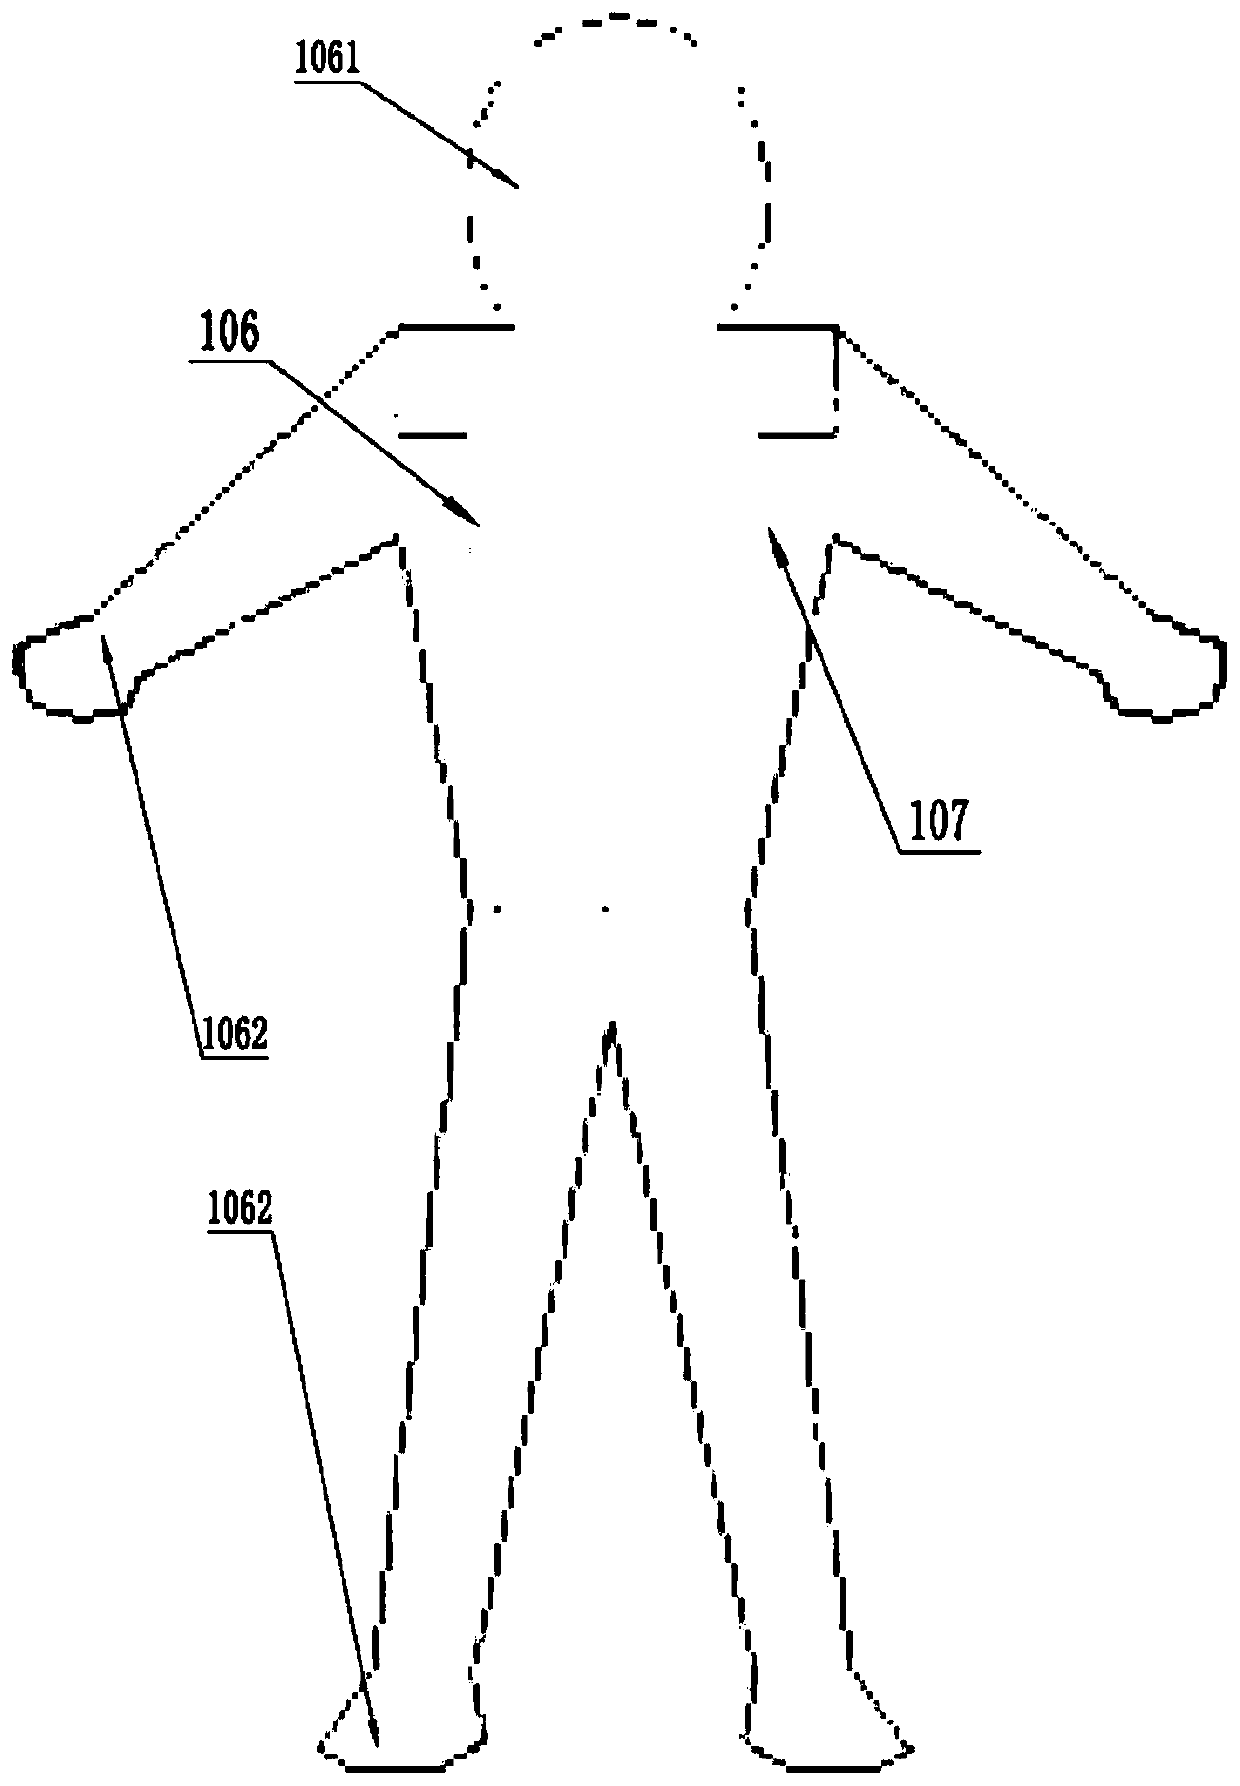 High-reliability isolation suit